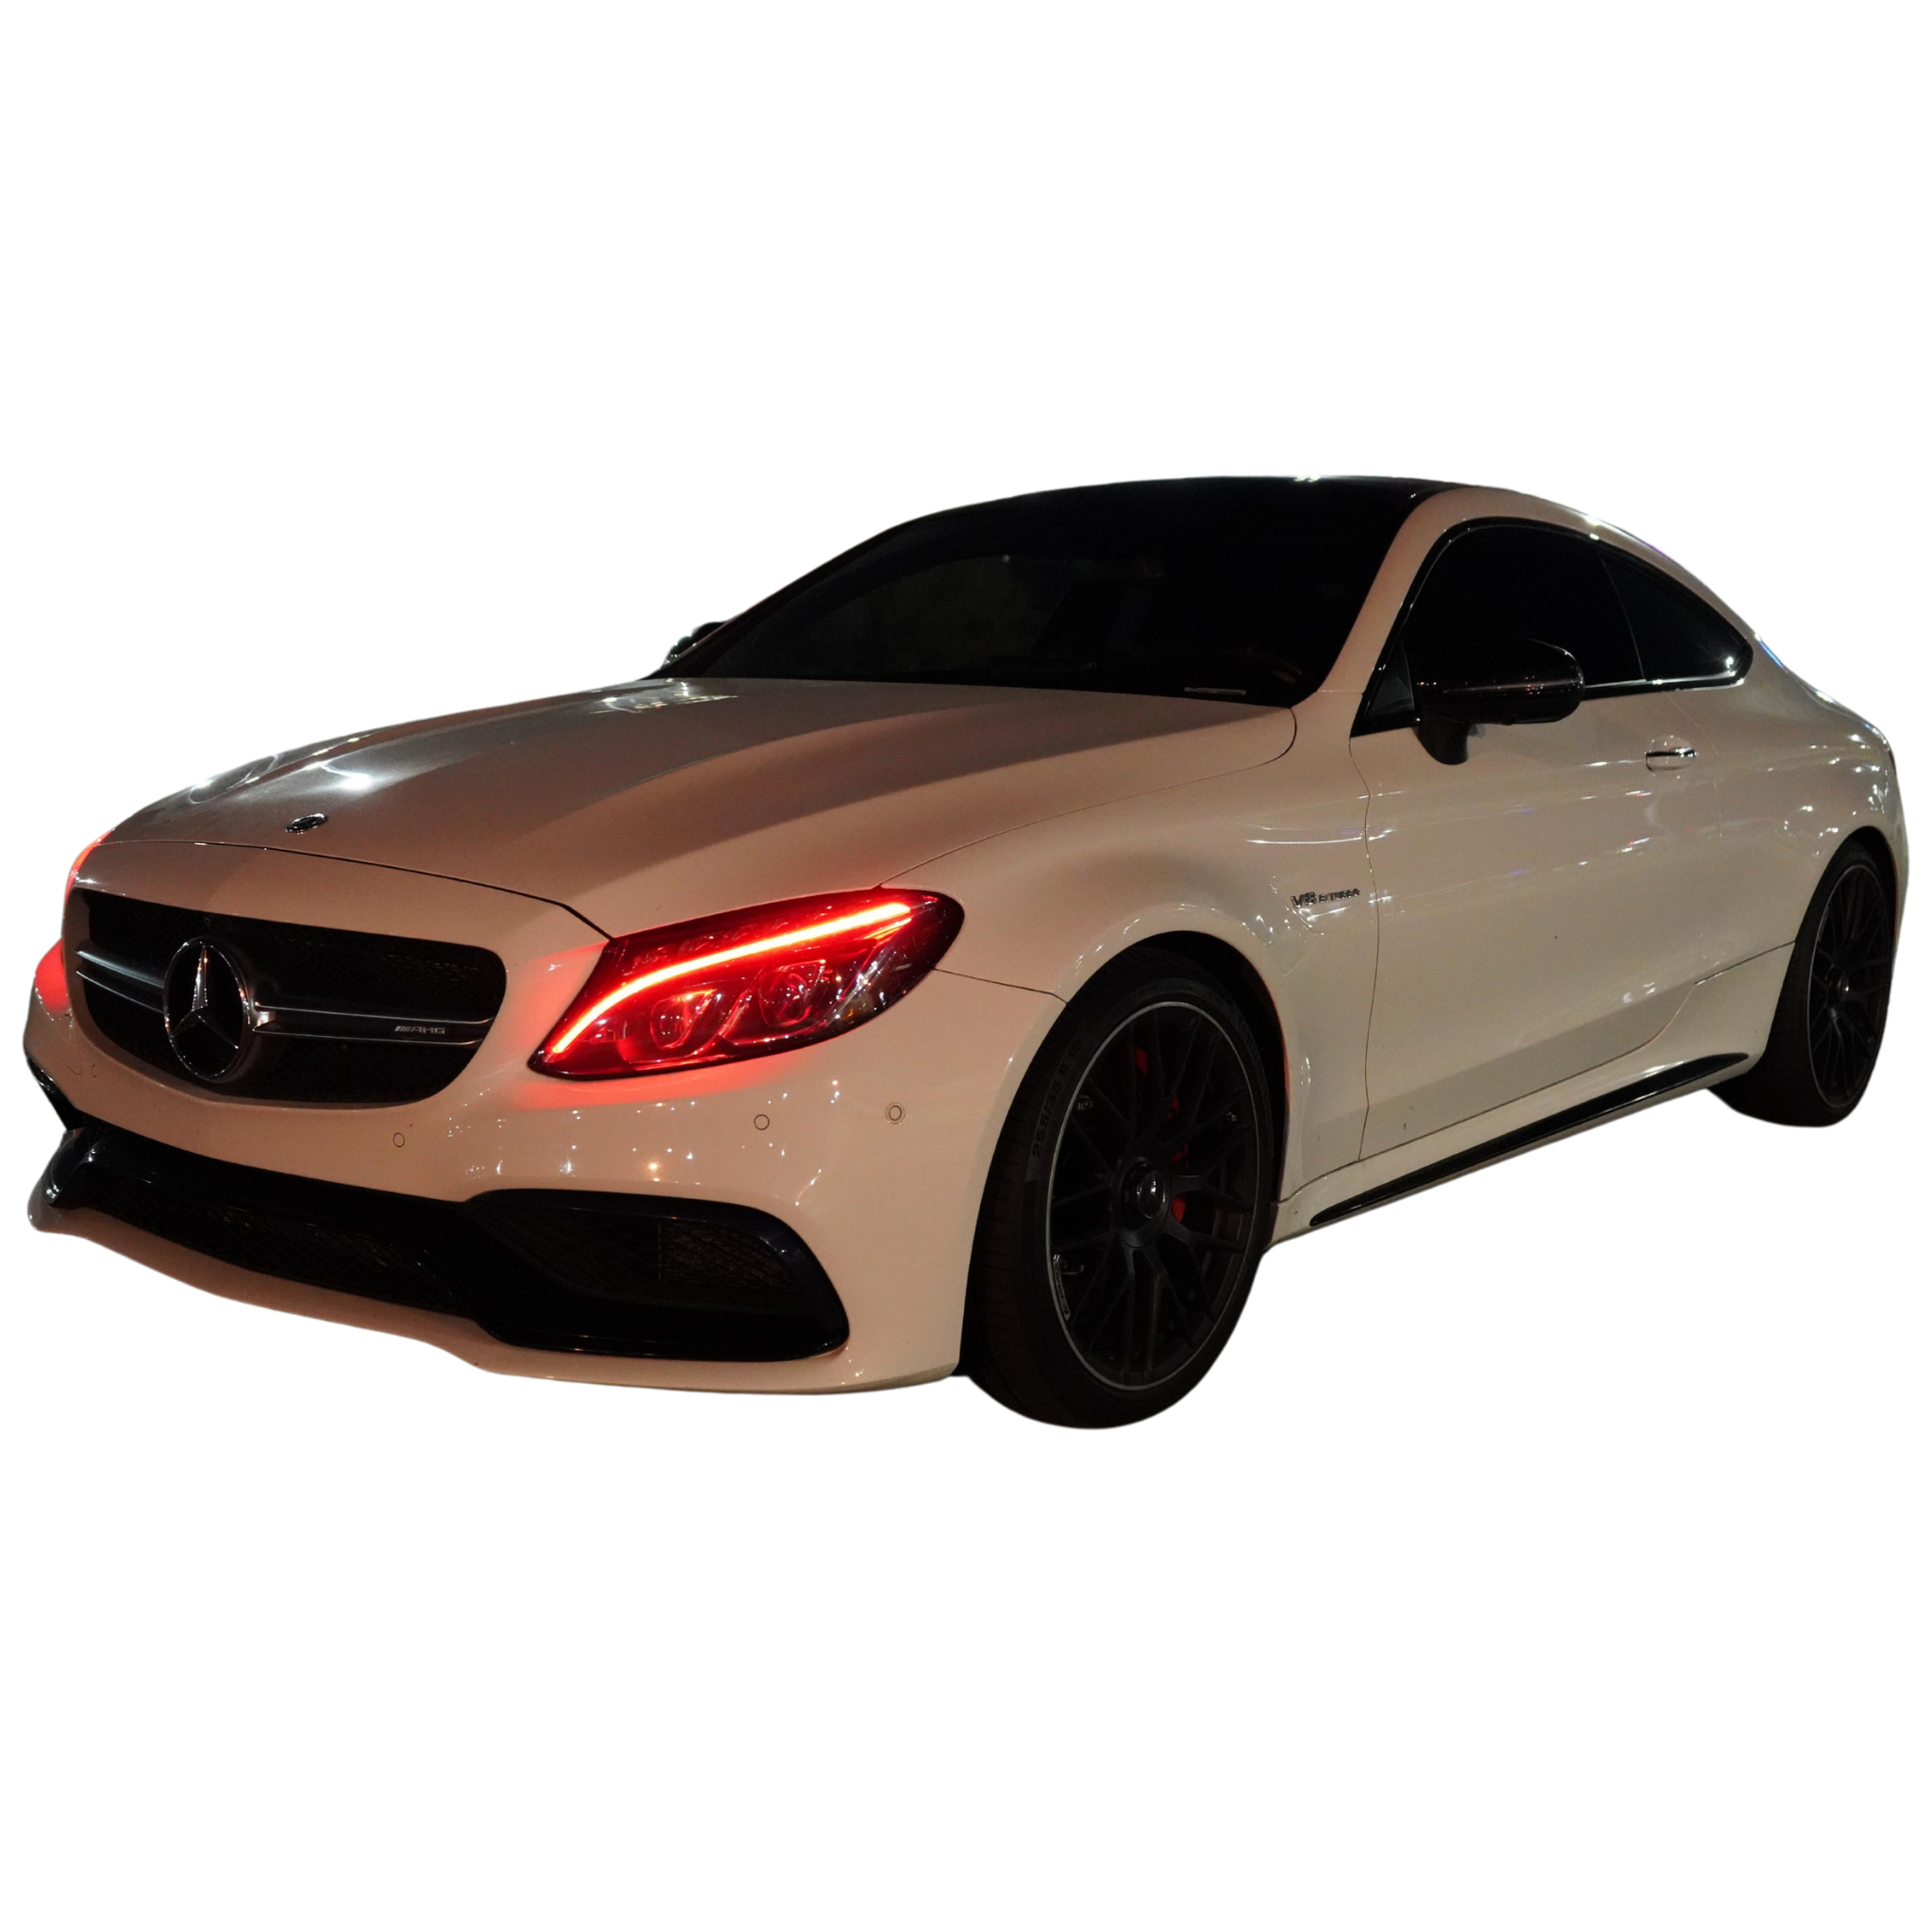 Mercedes Benz C-Class RGBW Multicolor DRL Boards (2015-2018)